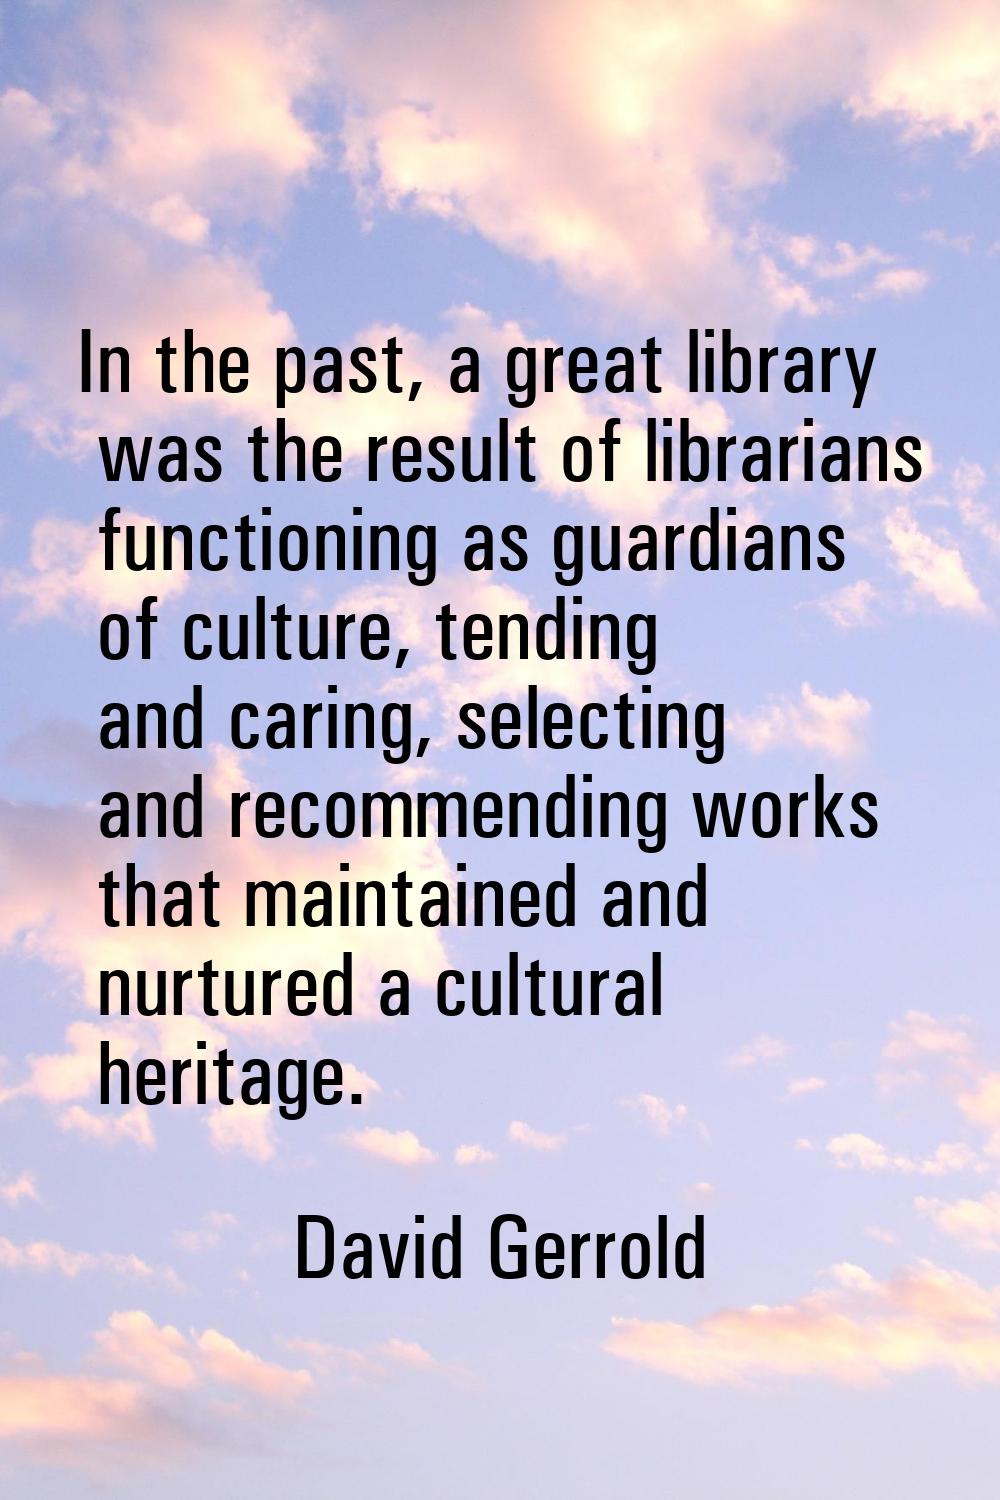 In the past, a great library was the result of librarians functioning as guardians of culture, tend